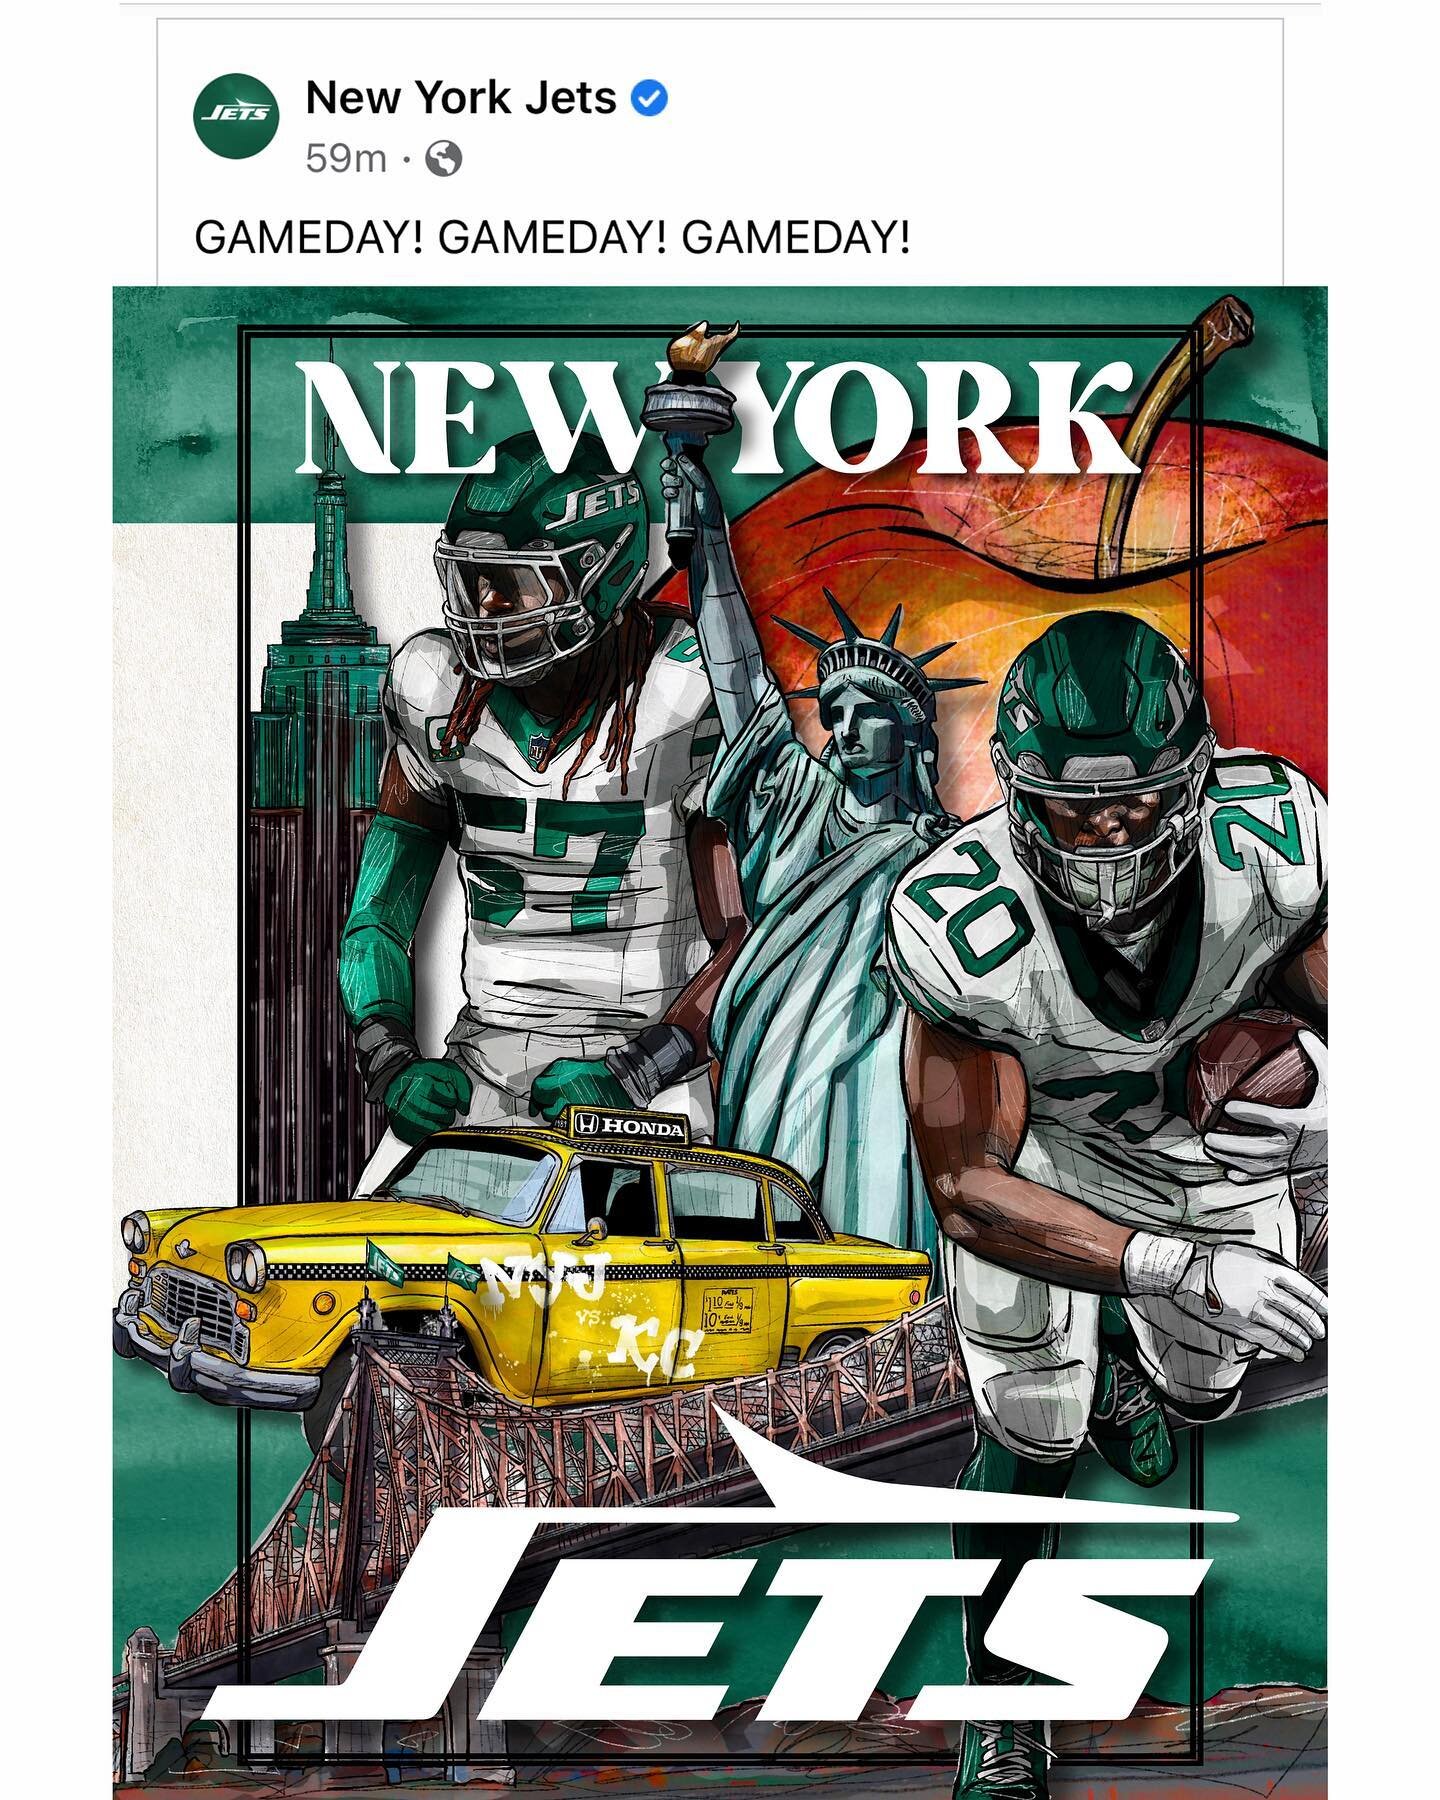 I've got some exciting news to finally share with you all!! About a month ago, THE New York Jets reached out to me, trusting me with this special project. Here is the game day graphic for NFL Sunday Night Football for the Jets vs Chiefs game tonight 